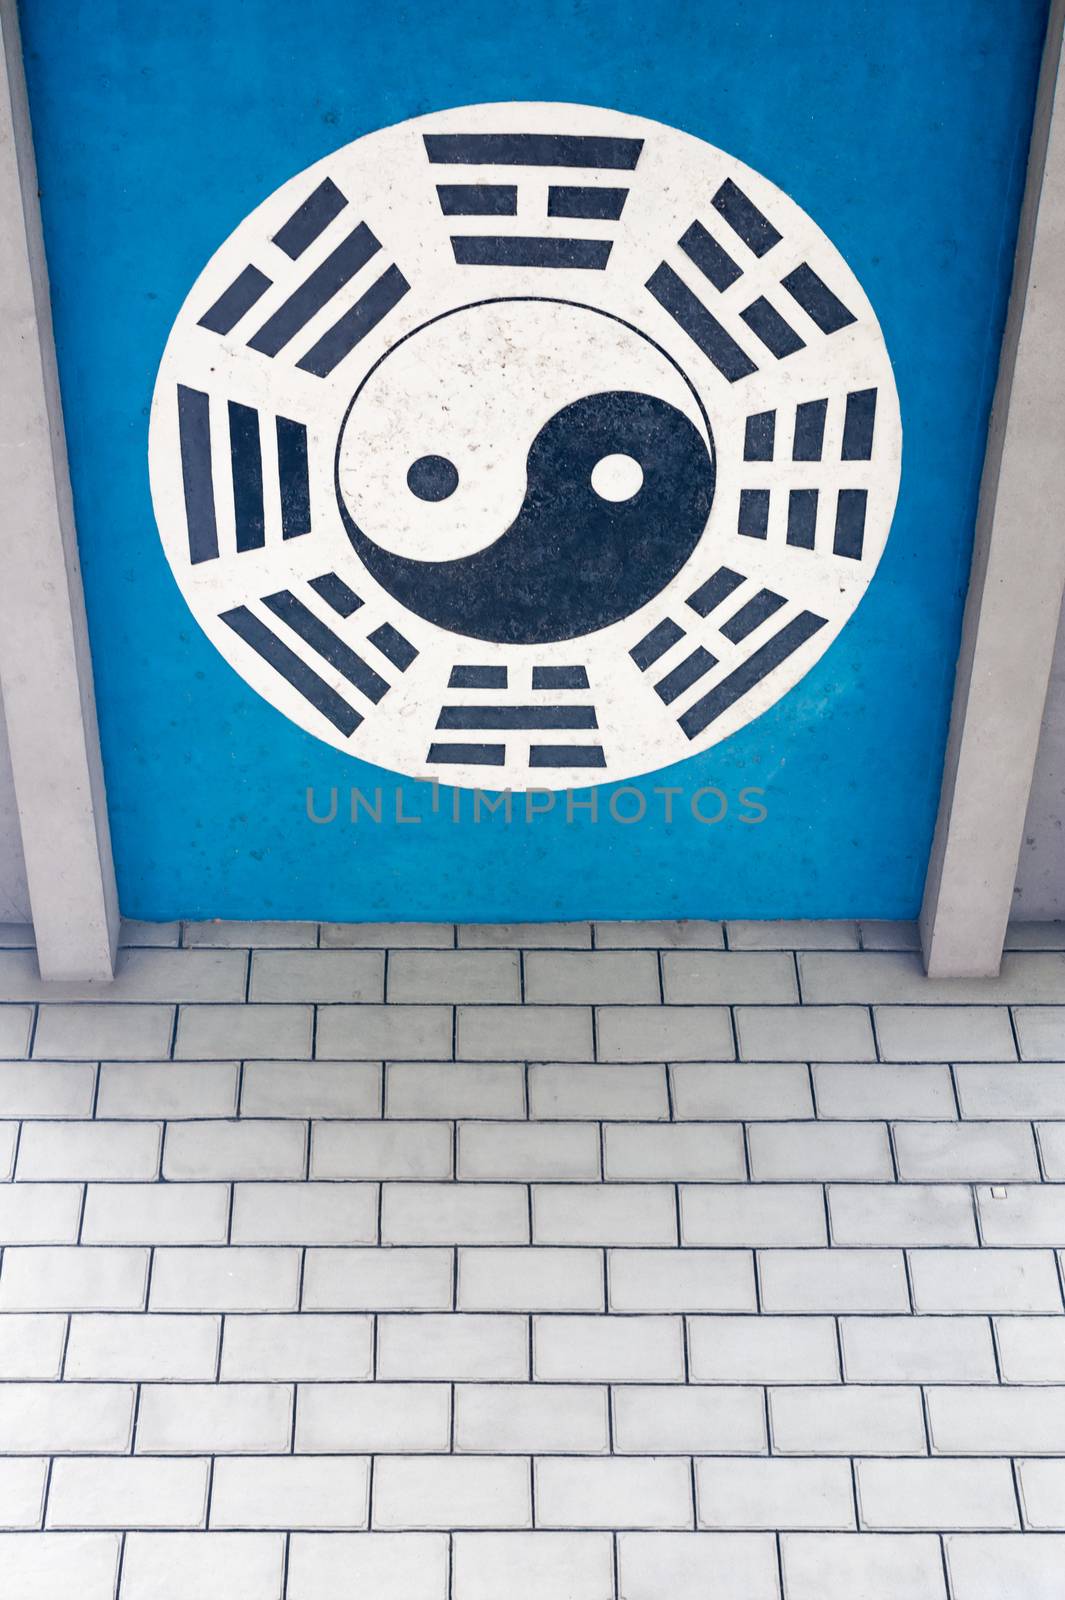 Yin and Yang symbol on a blue background above a brick wall in China